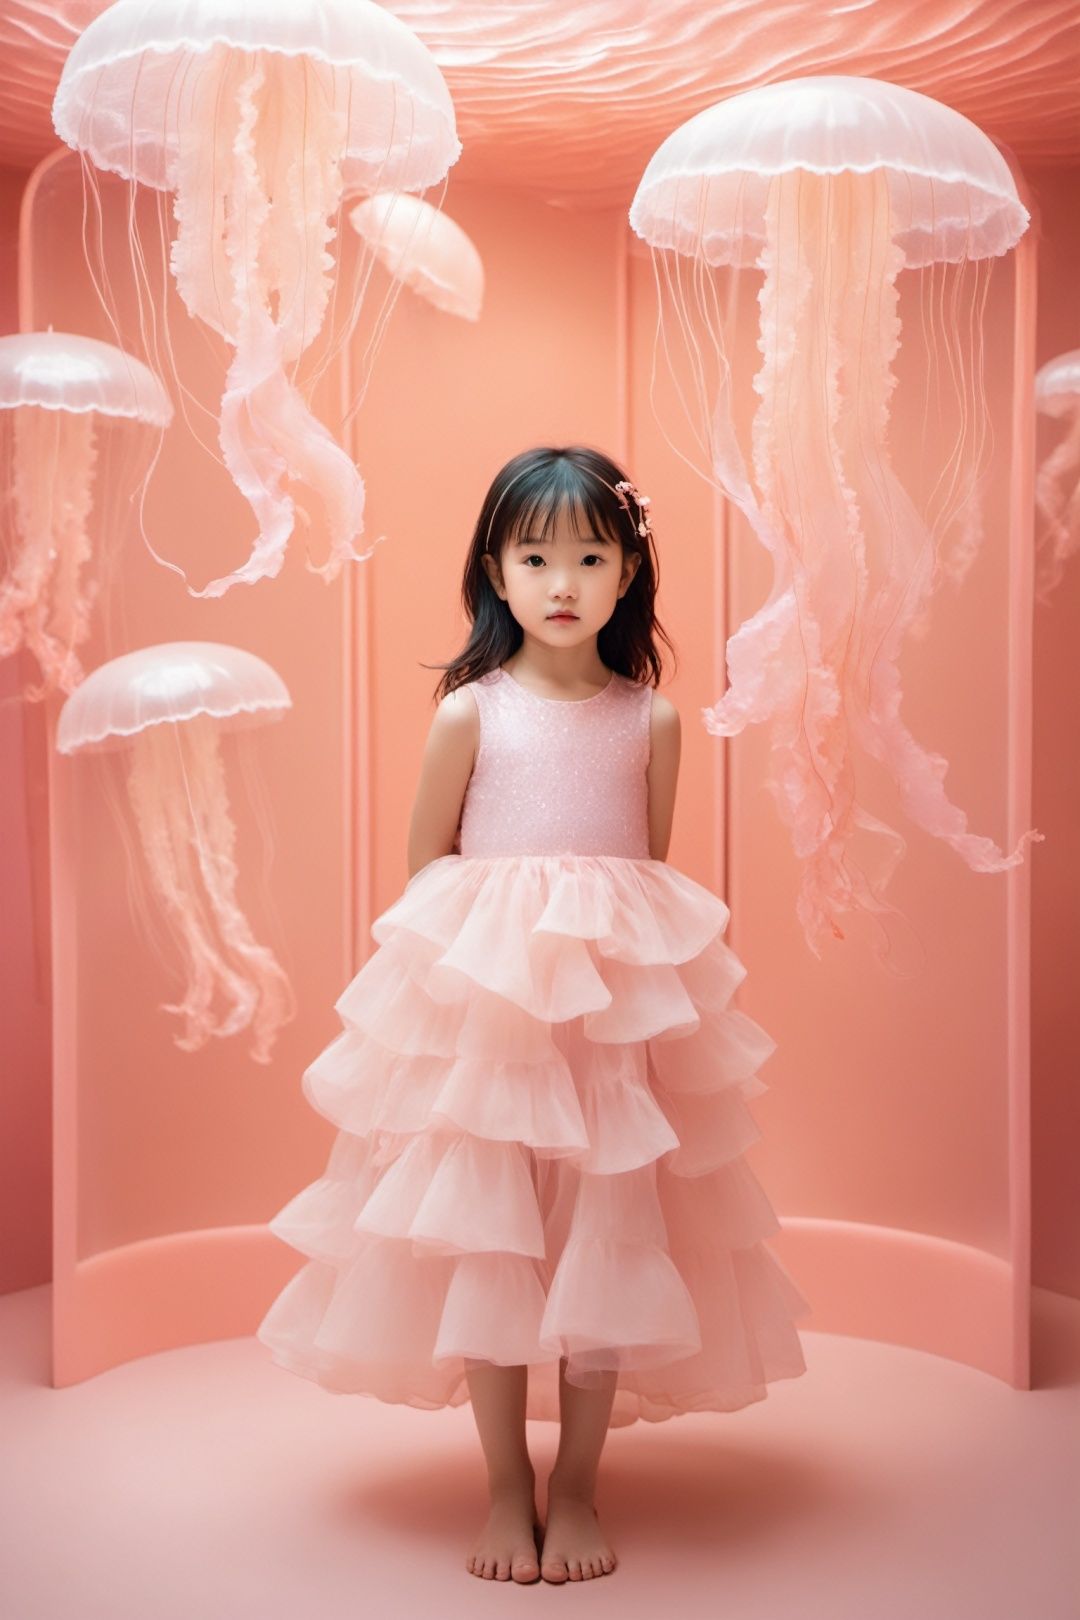 A 6-year-old Chinese girla little girl is standing in a pink chamber with jellyfish, in the style of soft, dream like quality, organic flowing forms, i can't believe how beautiful this is, ethereal dreamscapes, light white and light orange, sculptural costumes, nature inspired imagery  , full body photos,
